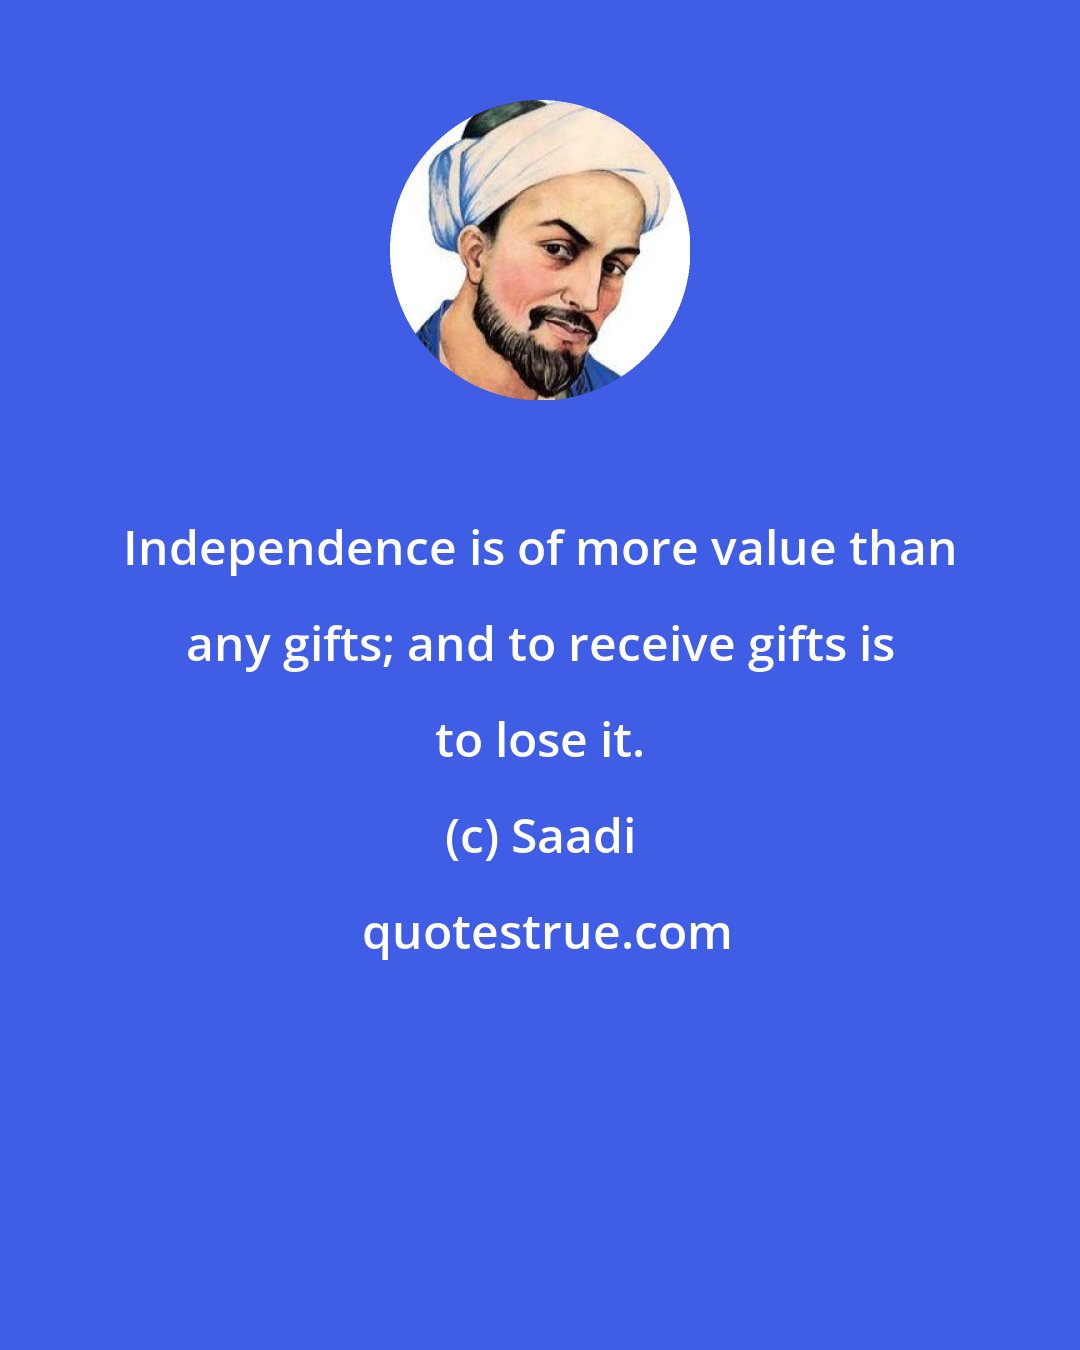 Saadi: Independence is of more value than any gifts; and to receive gifts is to lose it.